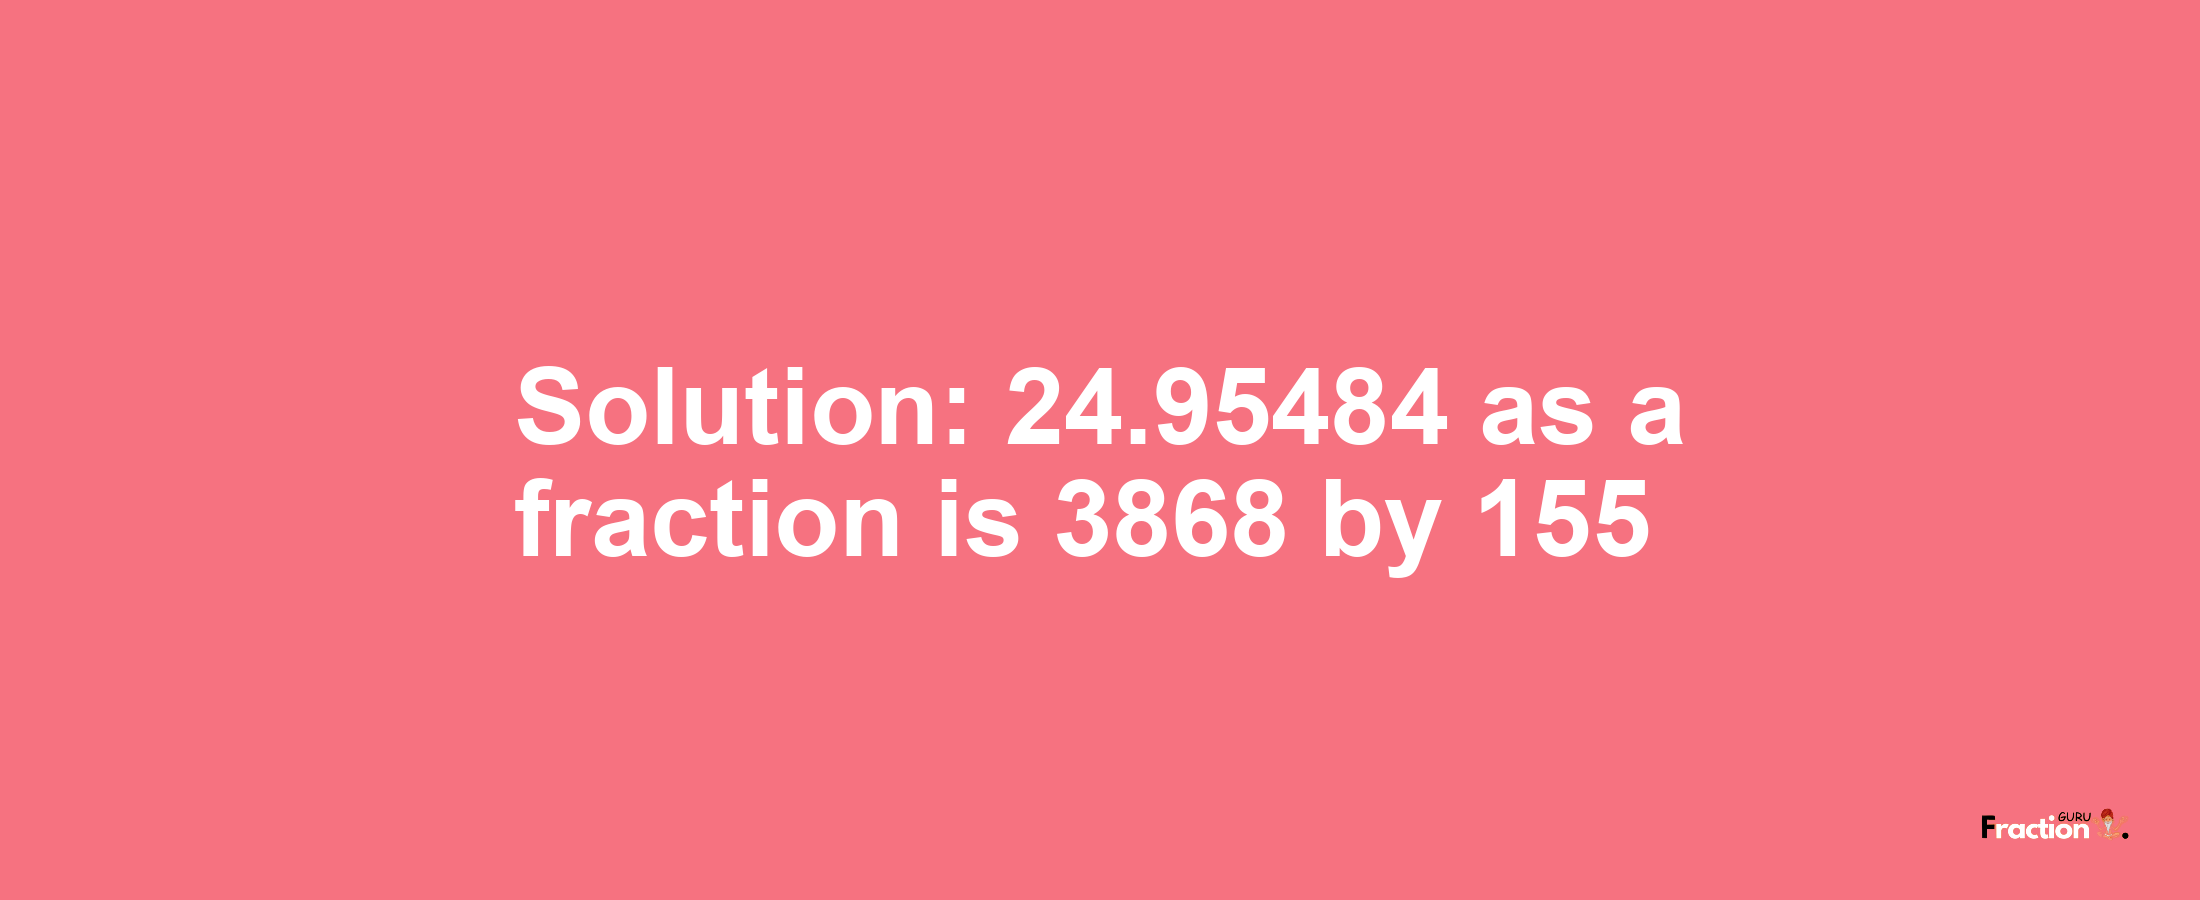 Solution:24.95484 as a fraction is 3868/155